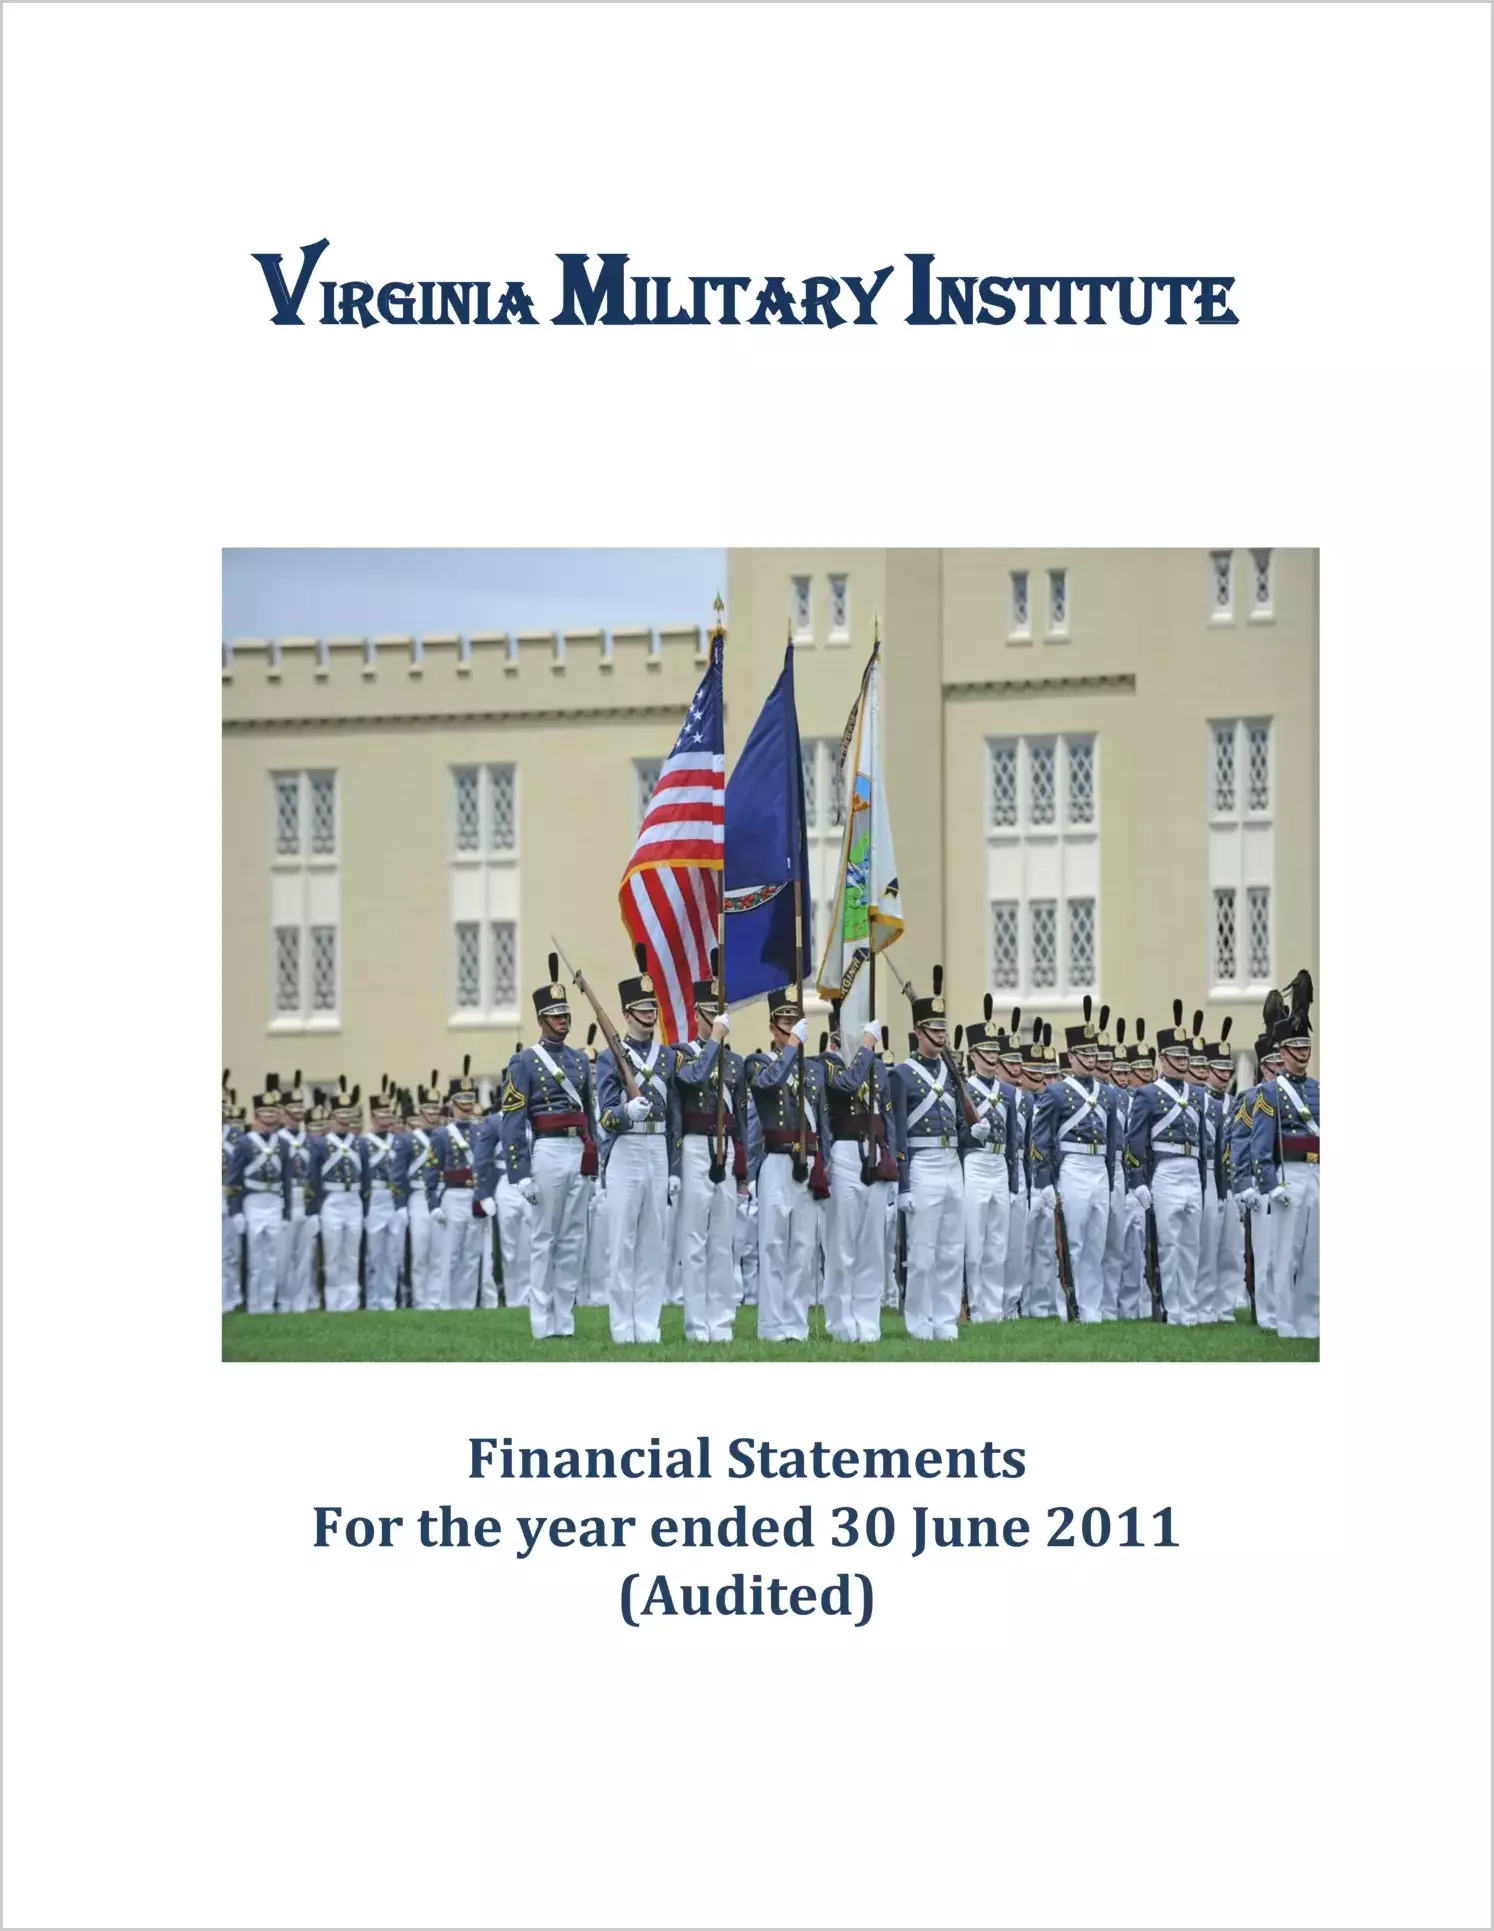 Virginia Military Institute Financial Statements for year ended June 30, 2011